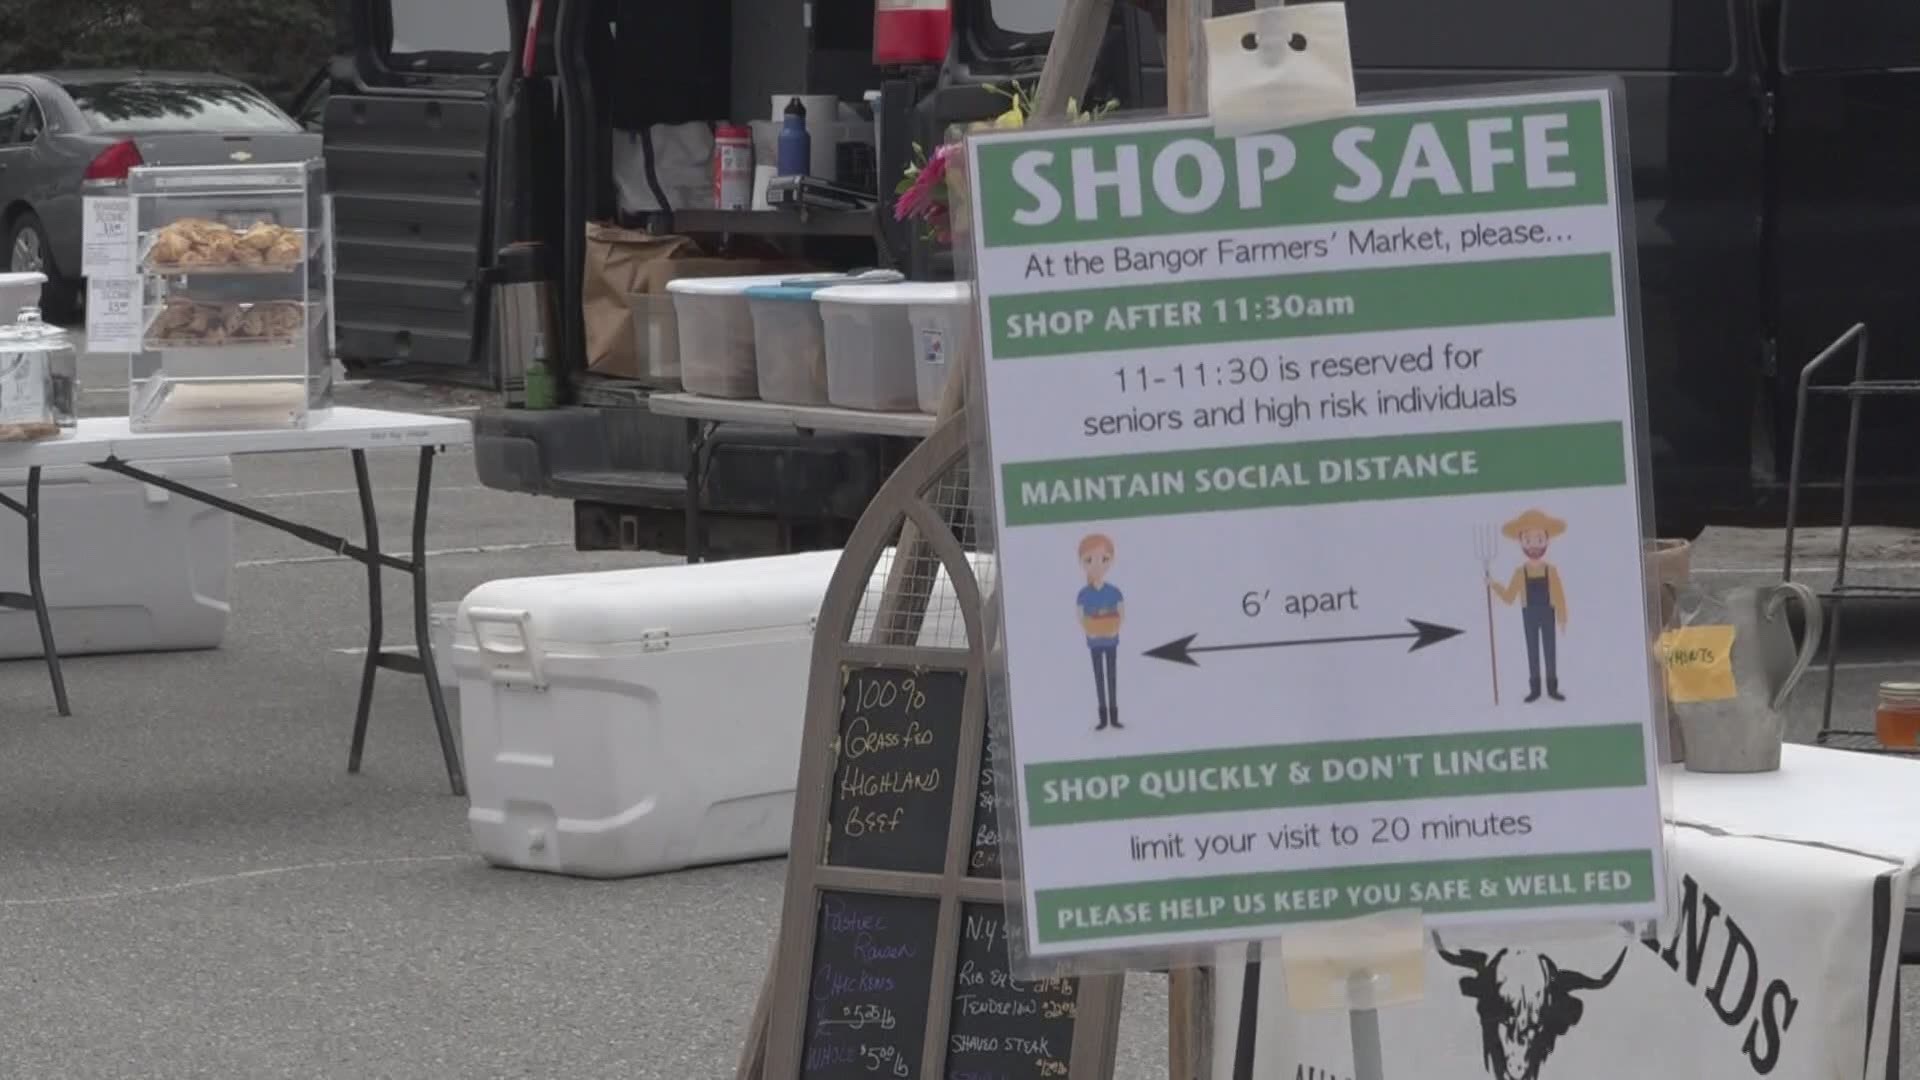 Bangor Farmers Market is moving outside to help prevent the spread of COVID-19. They'll be set up at the summer meeting spot across from the Bangor Public Library.